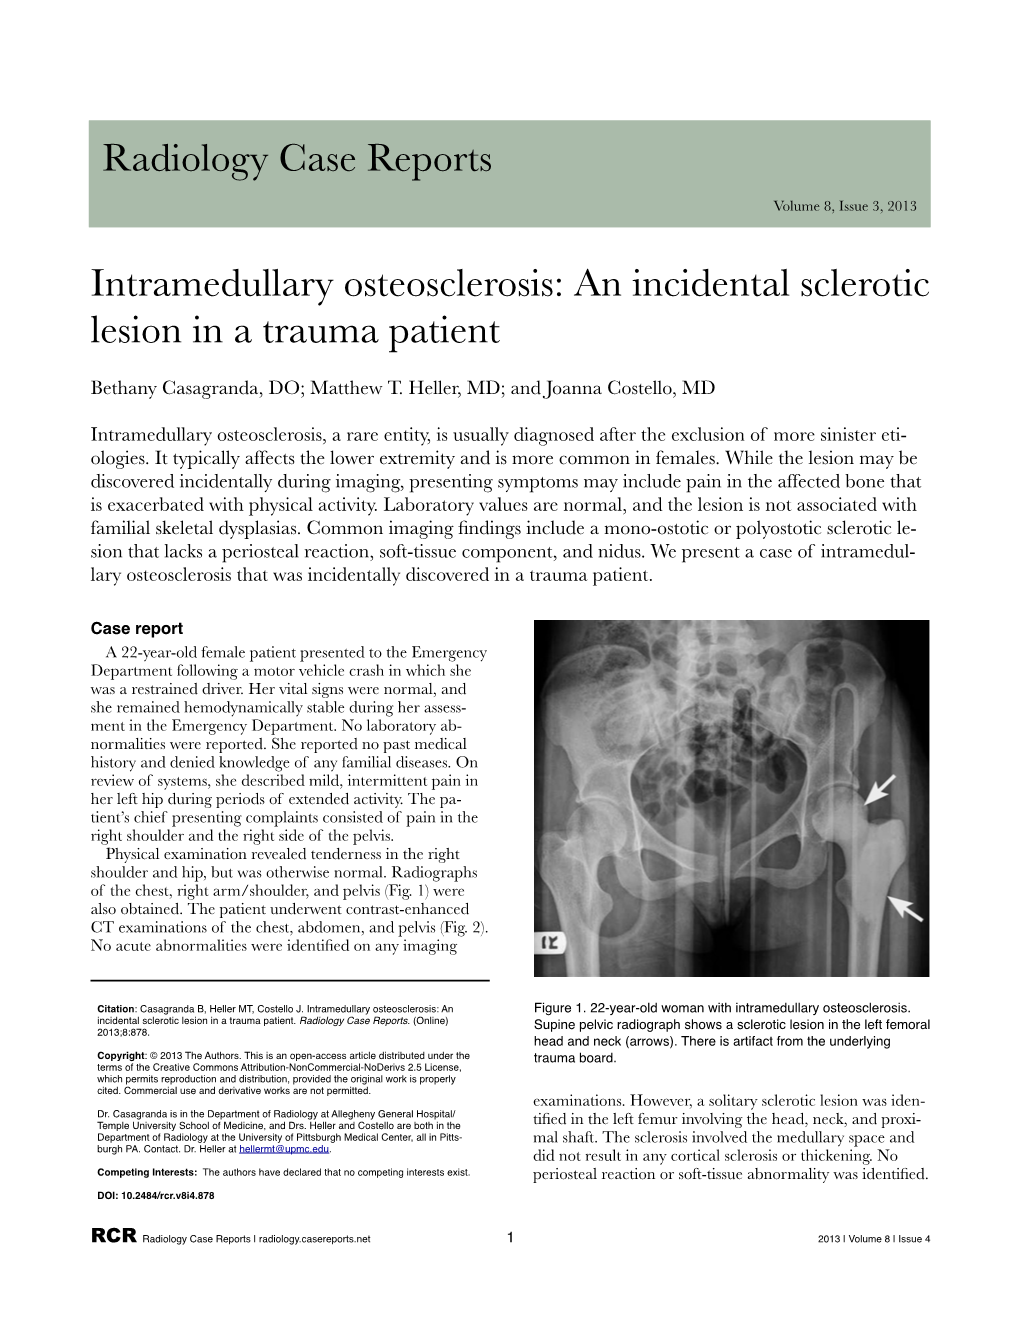 Intramedullary Osteosclerosis: an Incidental Sclerotic Lesion in a Trauma Patient